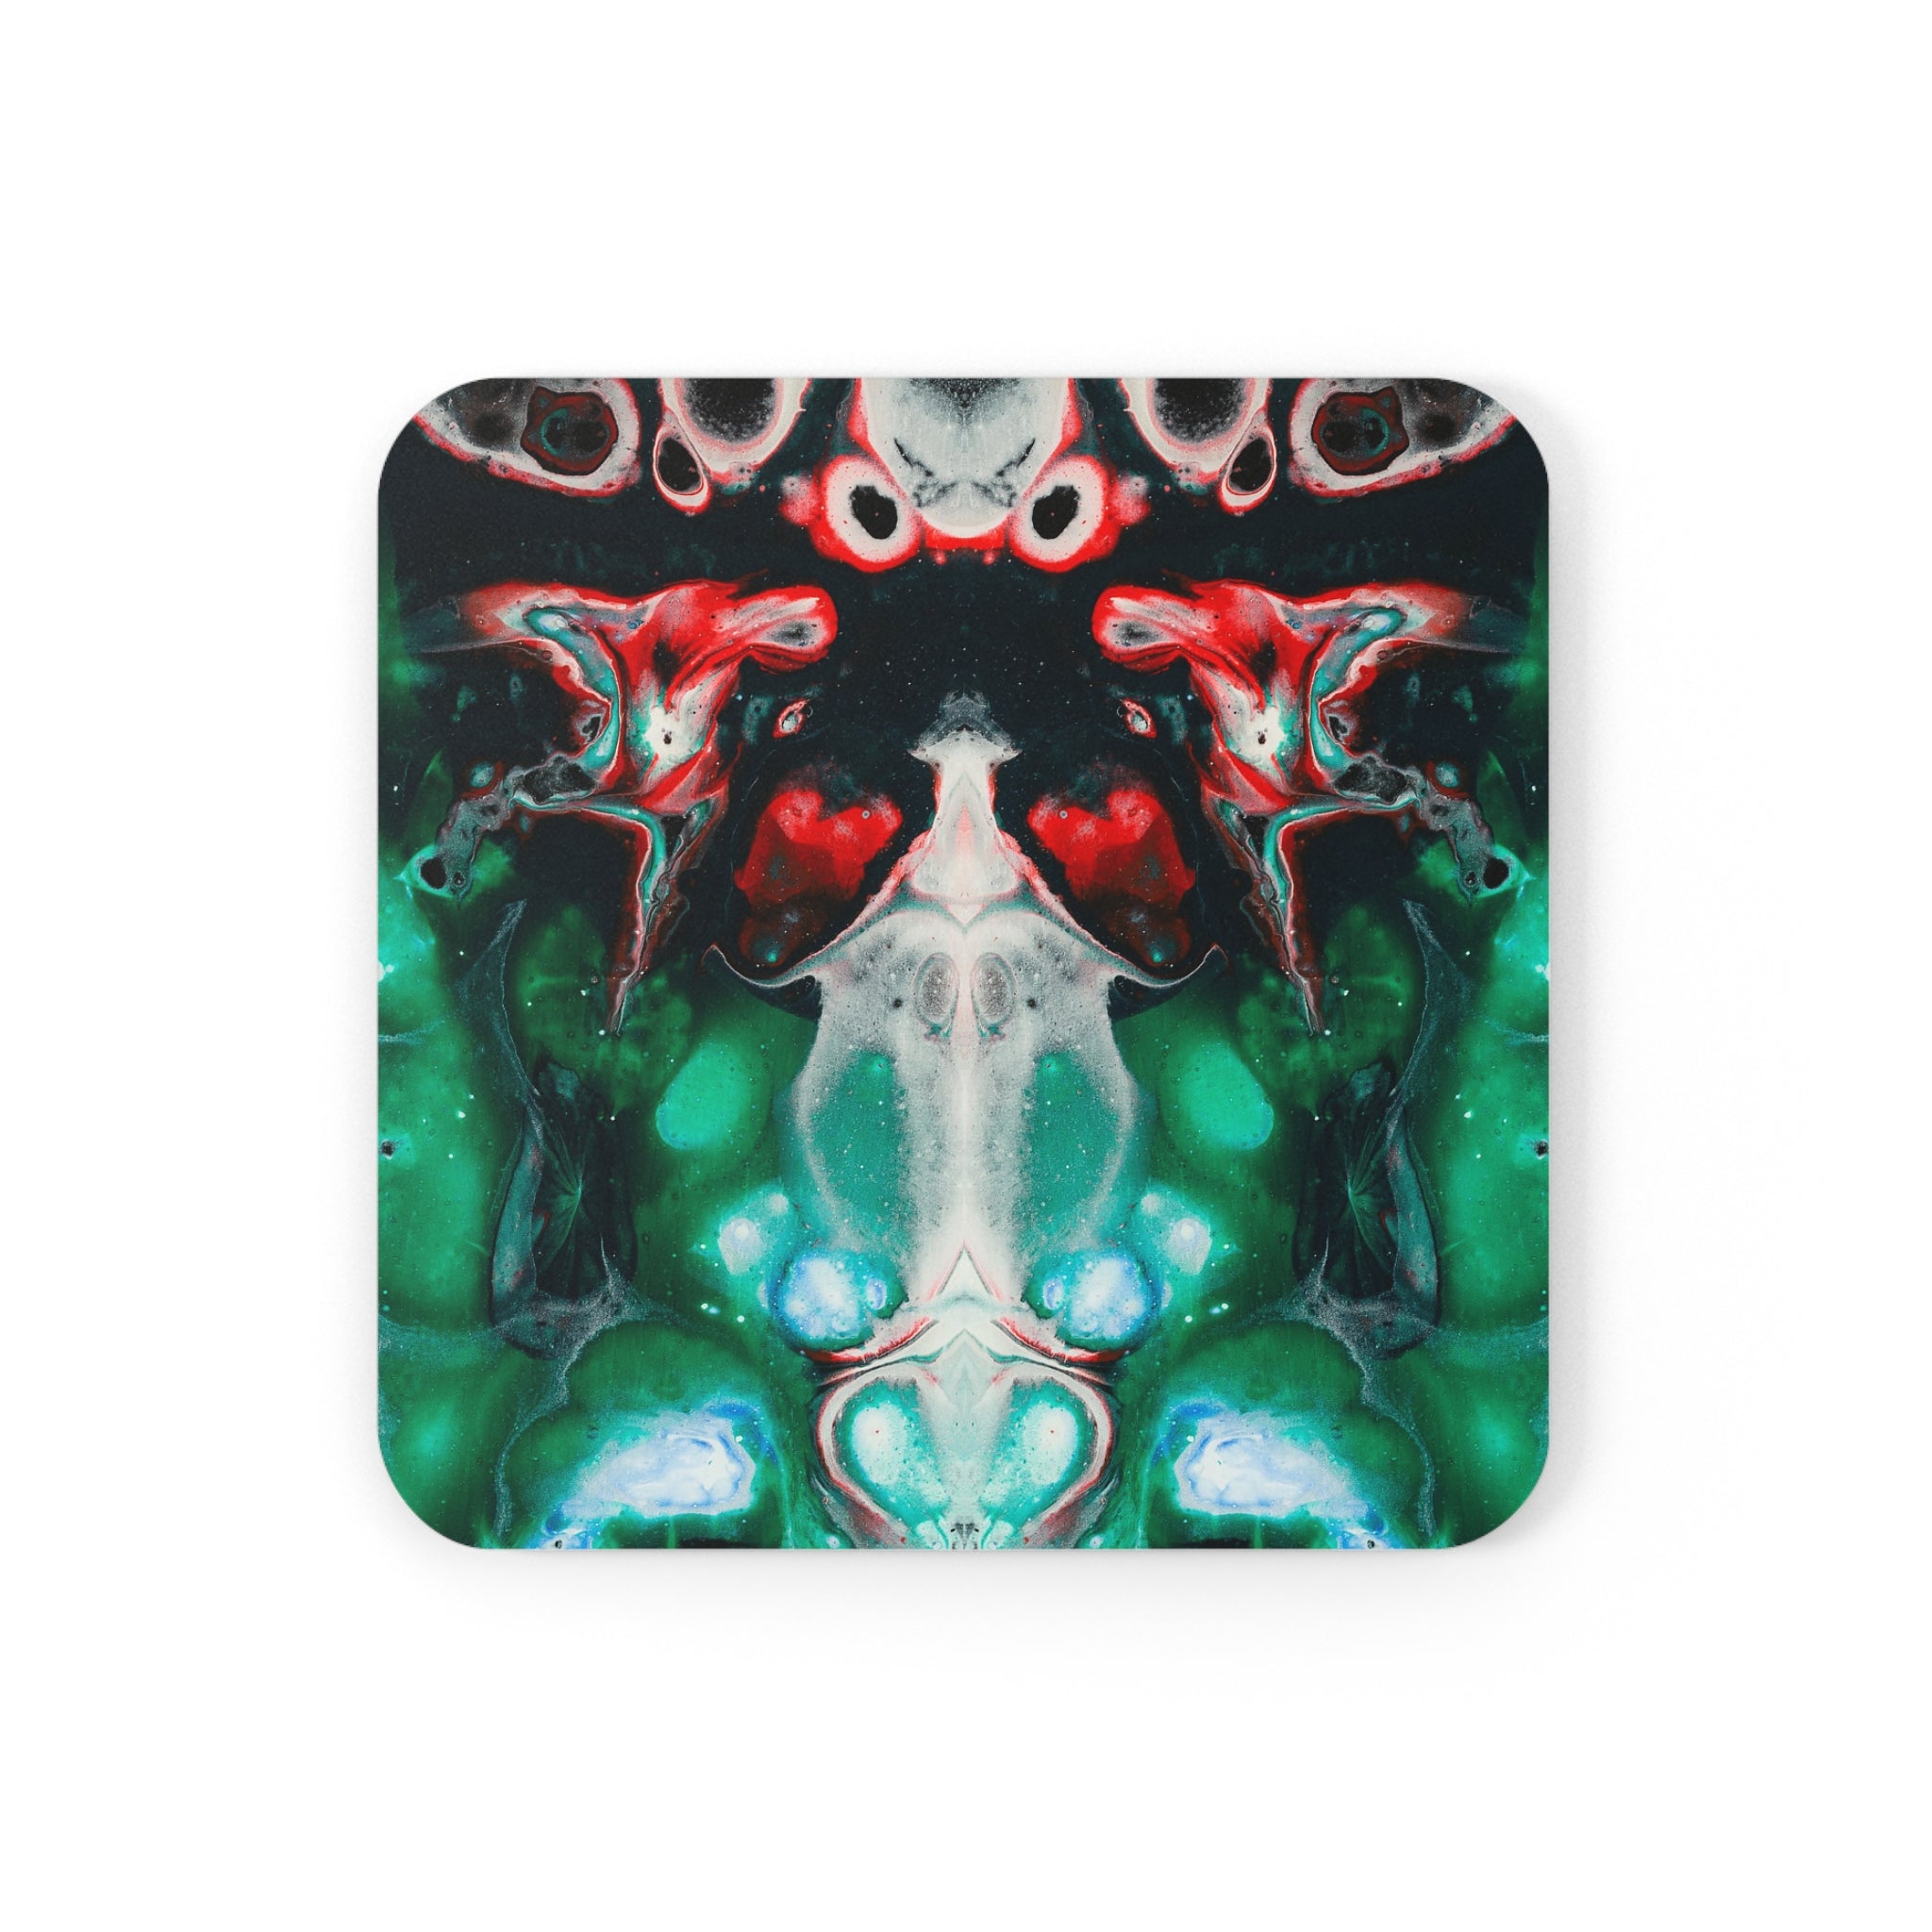 Cameron Creations - Galaxy Rose - Stylish Coffee Coaster - Square Front